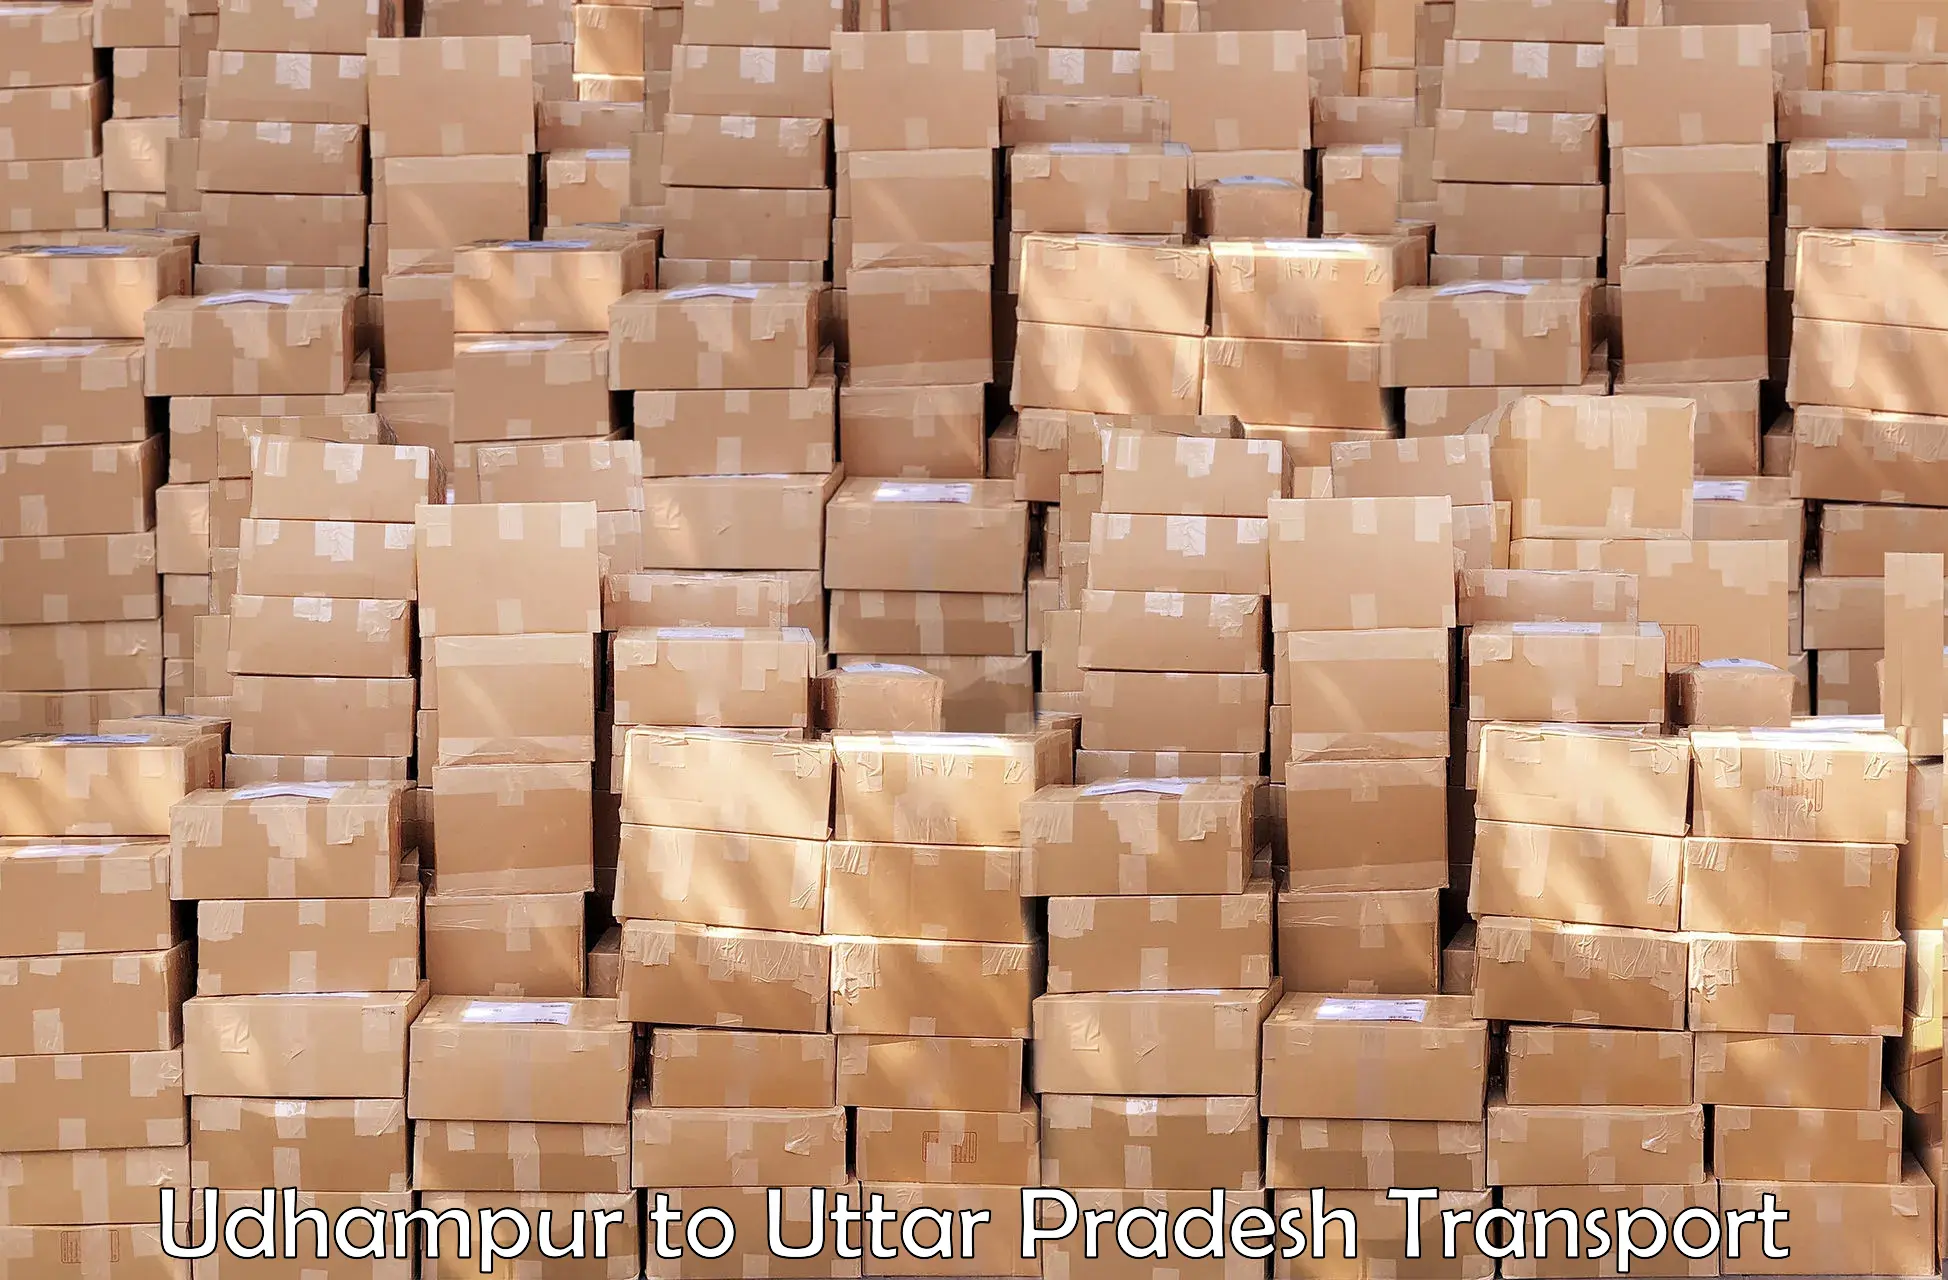 Package delivery services Udhampur to Anupshahar